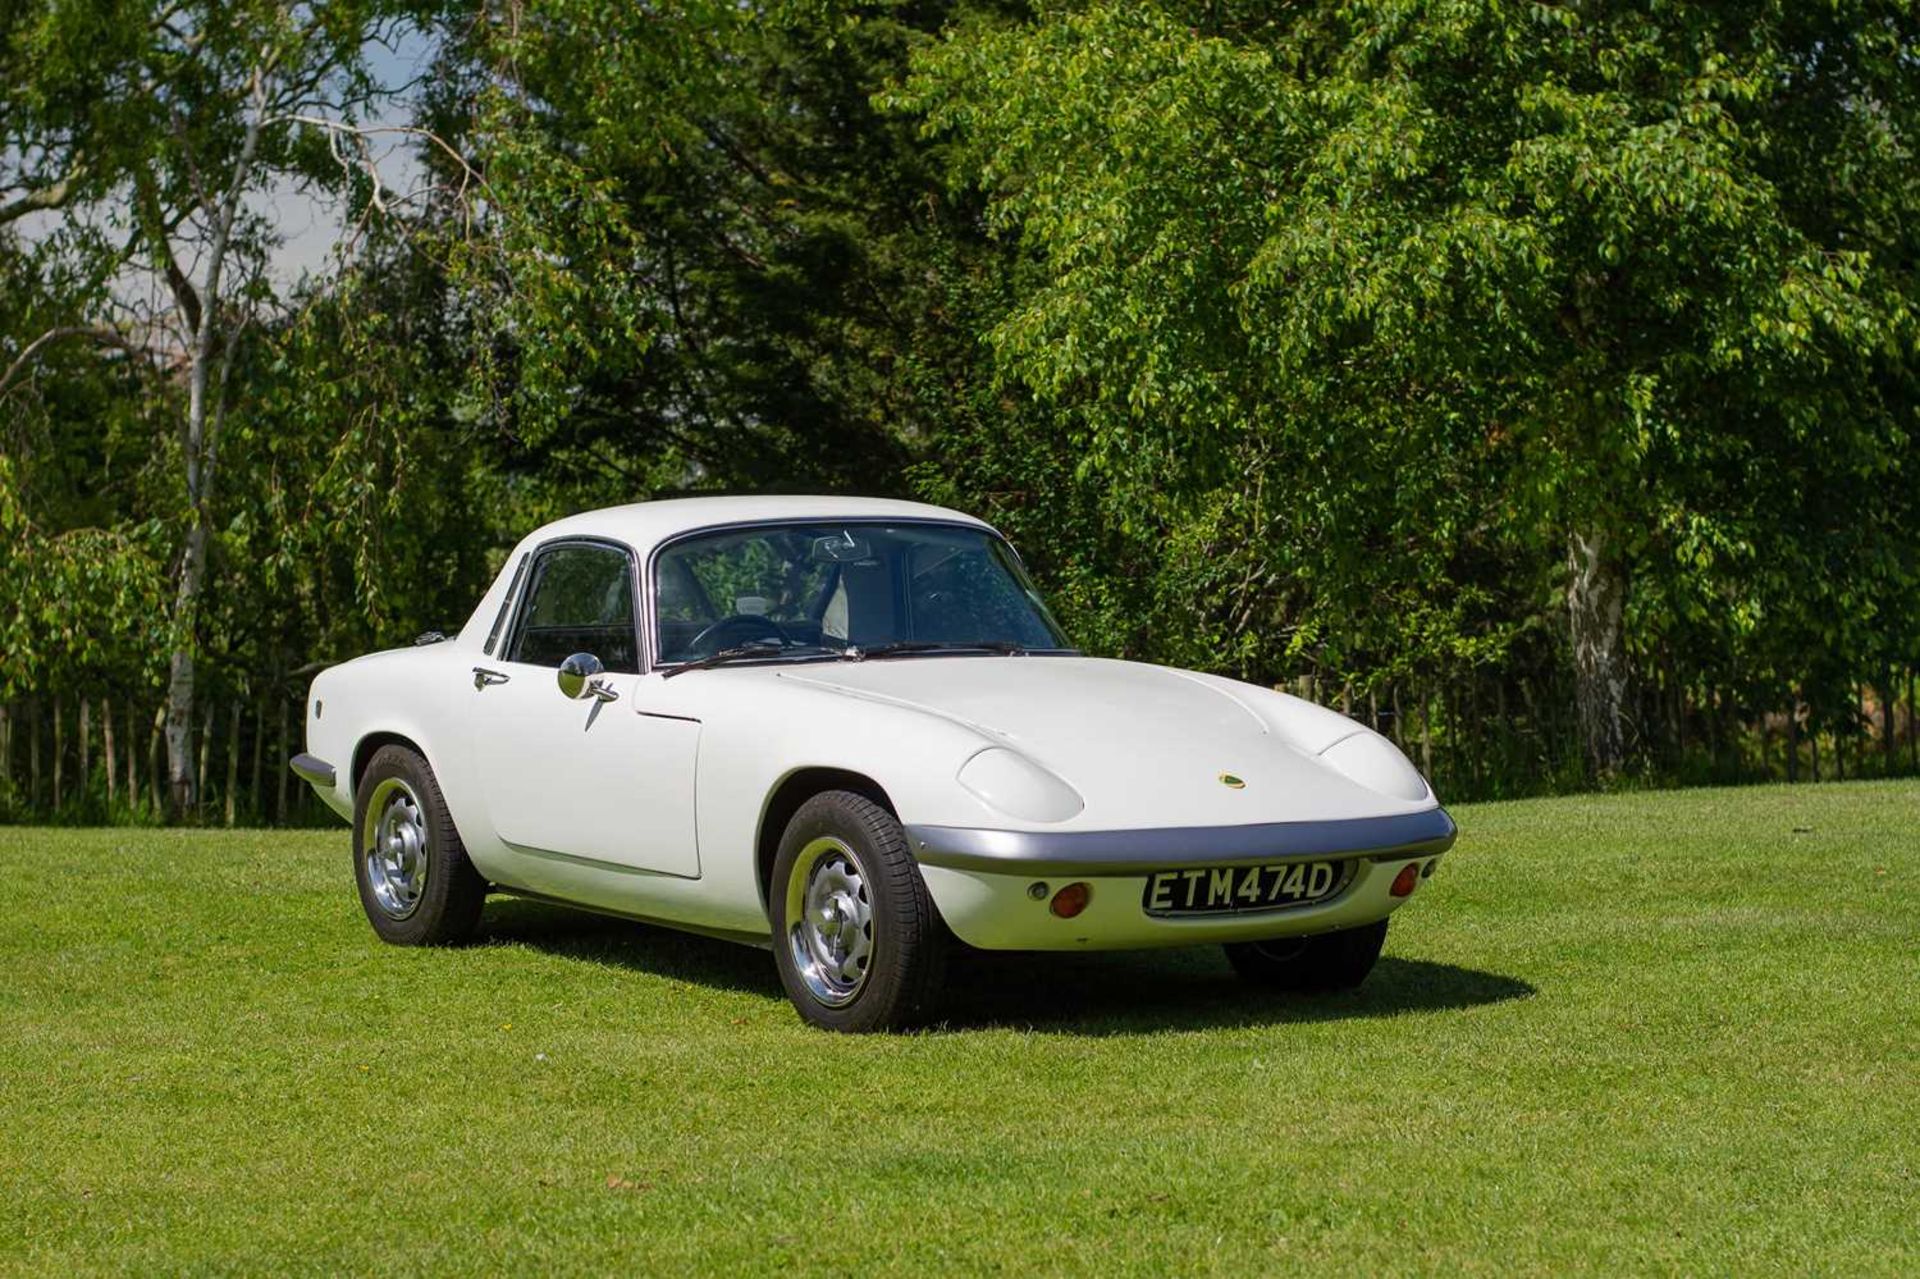 1966 Lotus Elan Fixed Head Coupe Sympathetically restored, equipped with desirable upgrades - Image 3 of 100